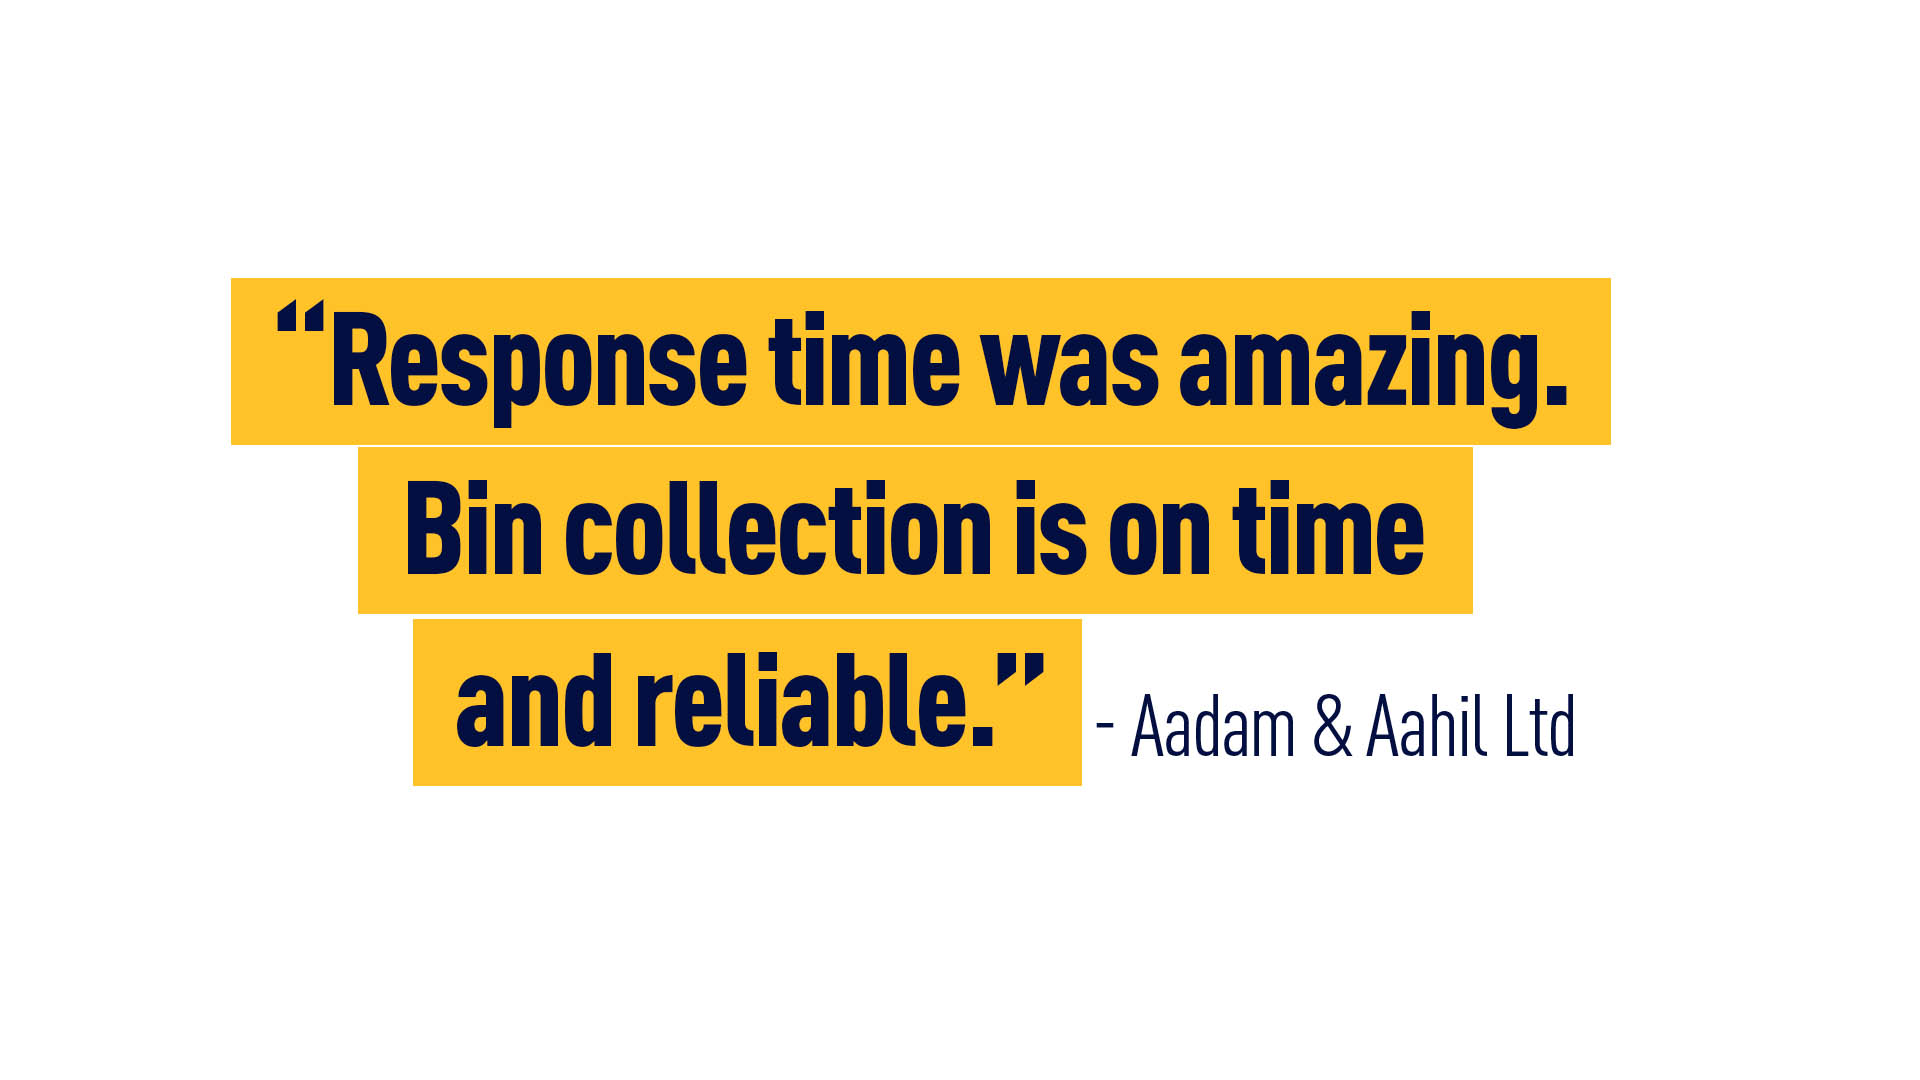 “Response time was amazing. Bin collection is on time and reliable.” - Aadam & Aahil Ltd